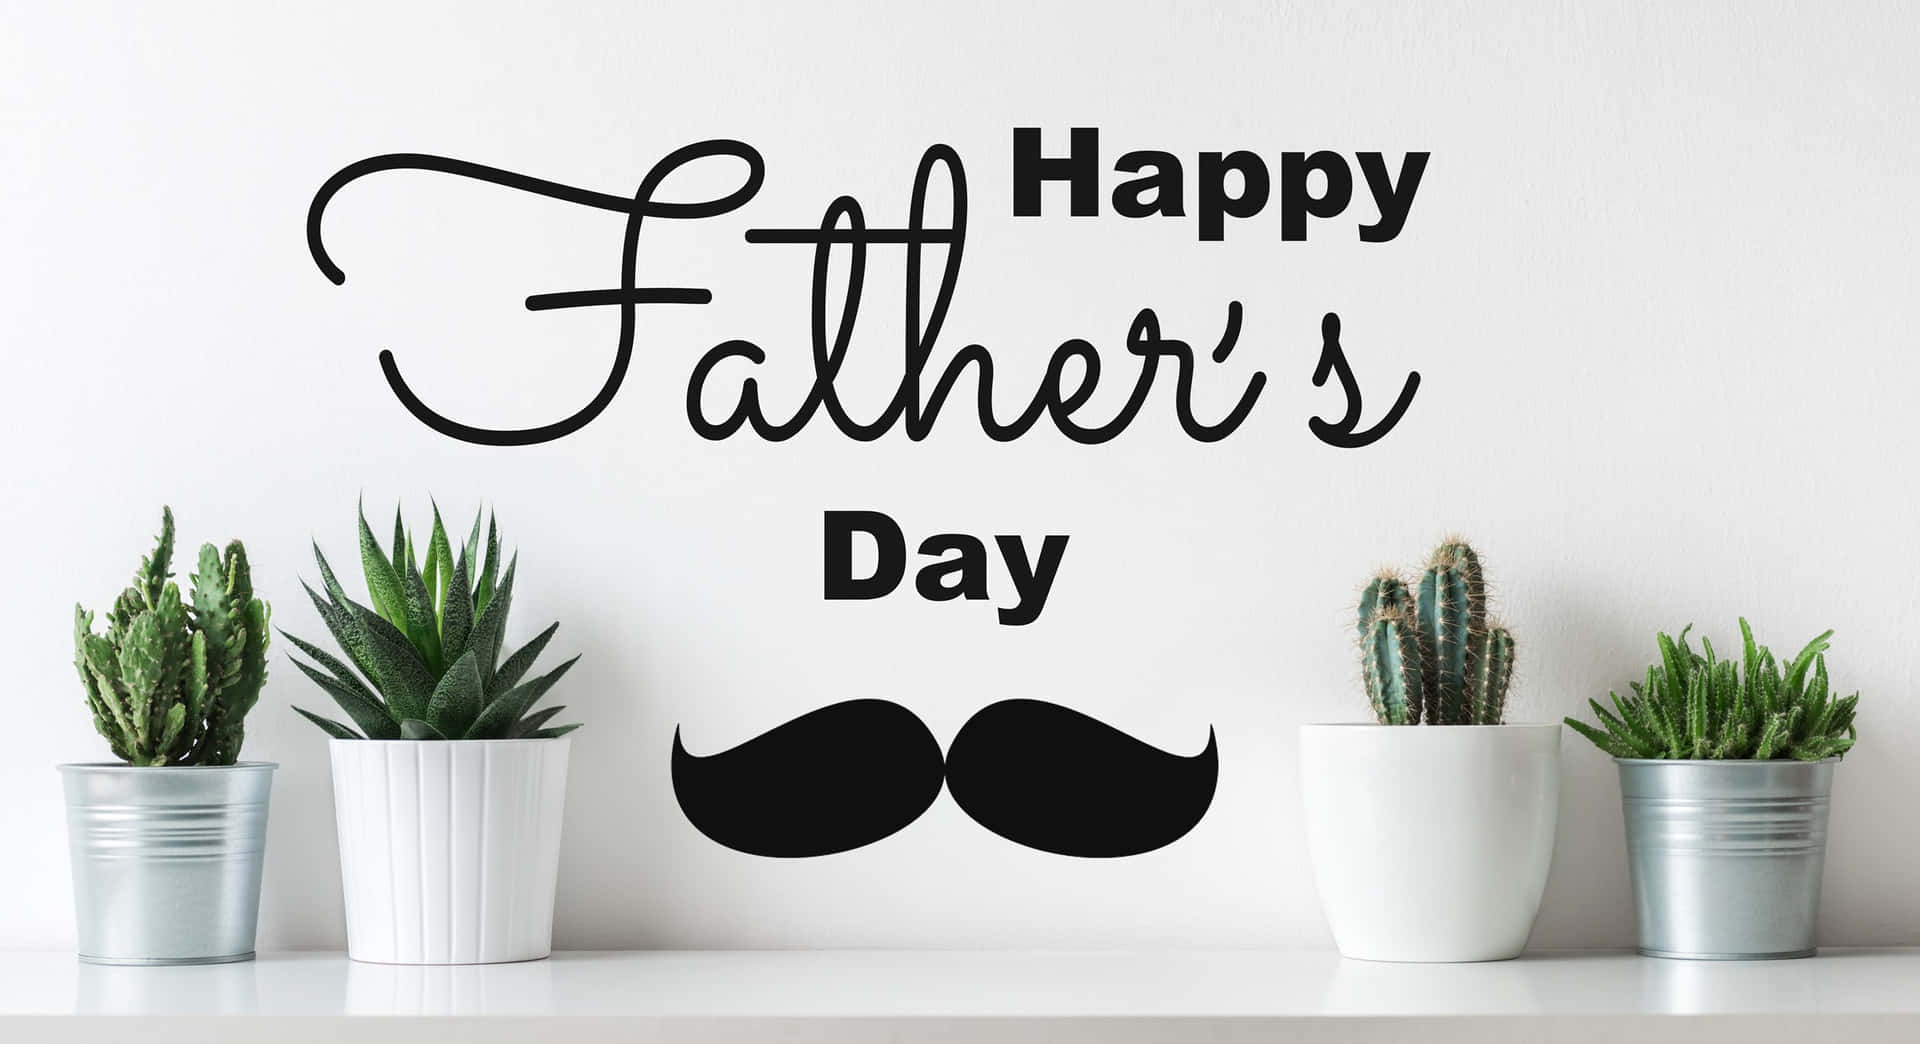 Celebrate Father's Day with a smile!